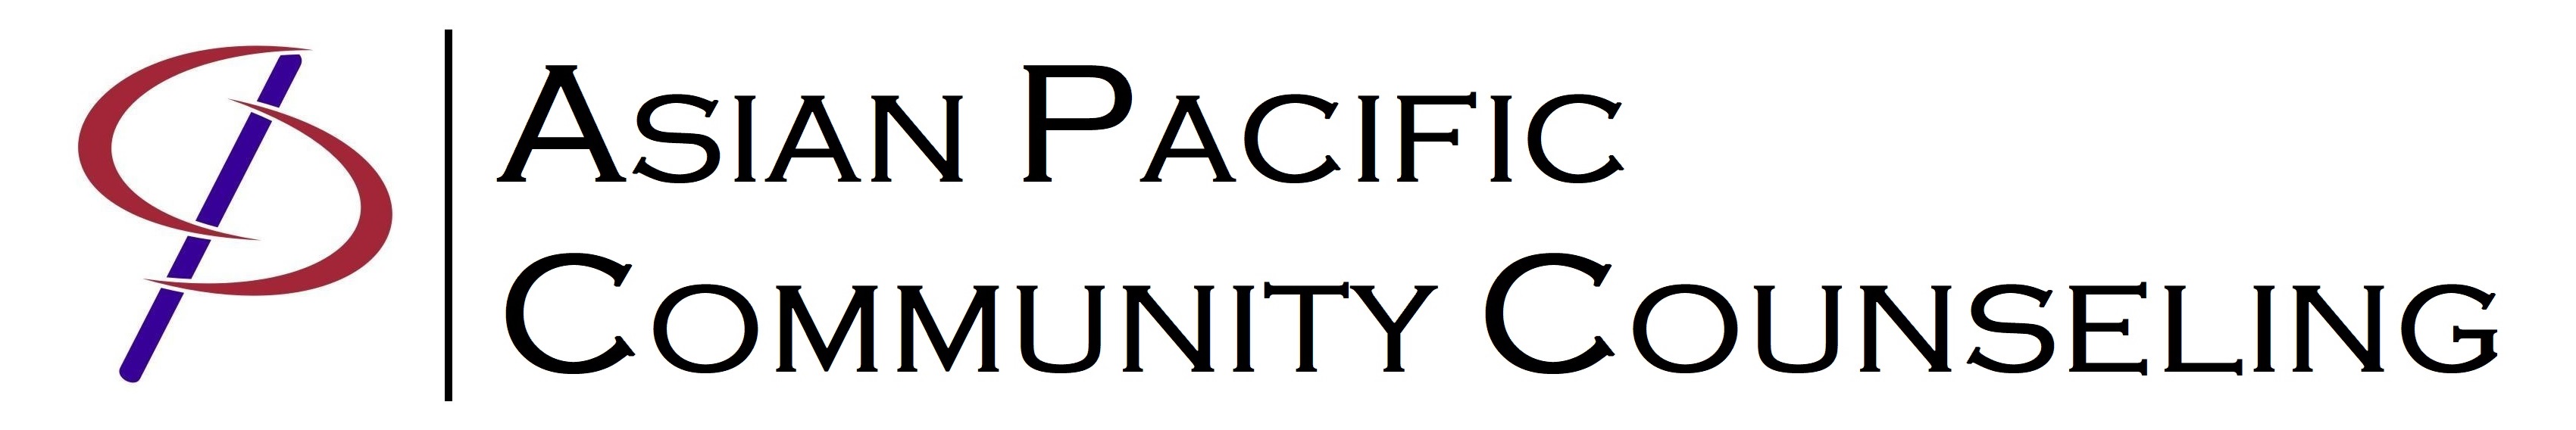 ASIAN PACIFIC COMMUNITY COUNSELING